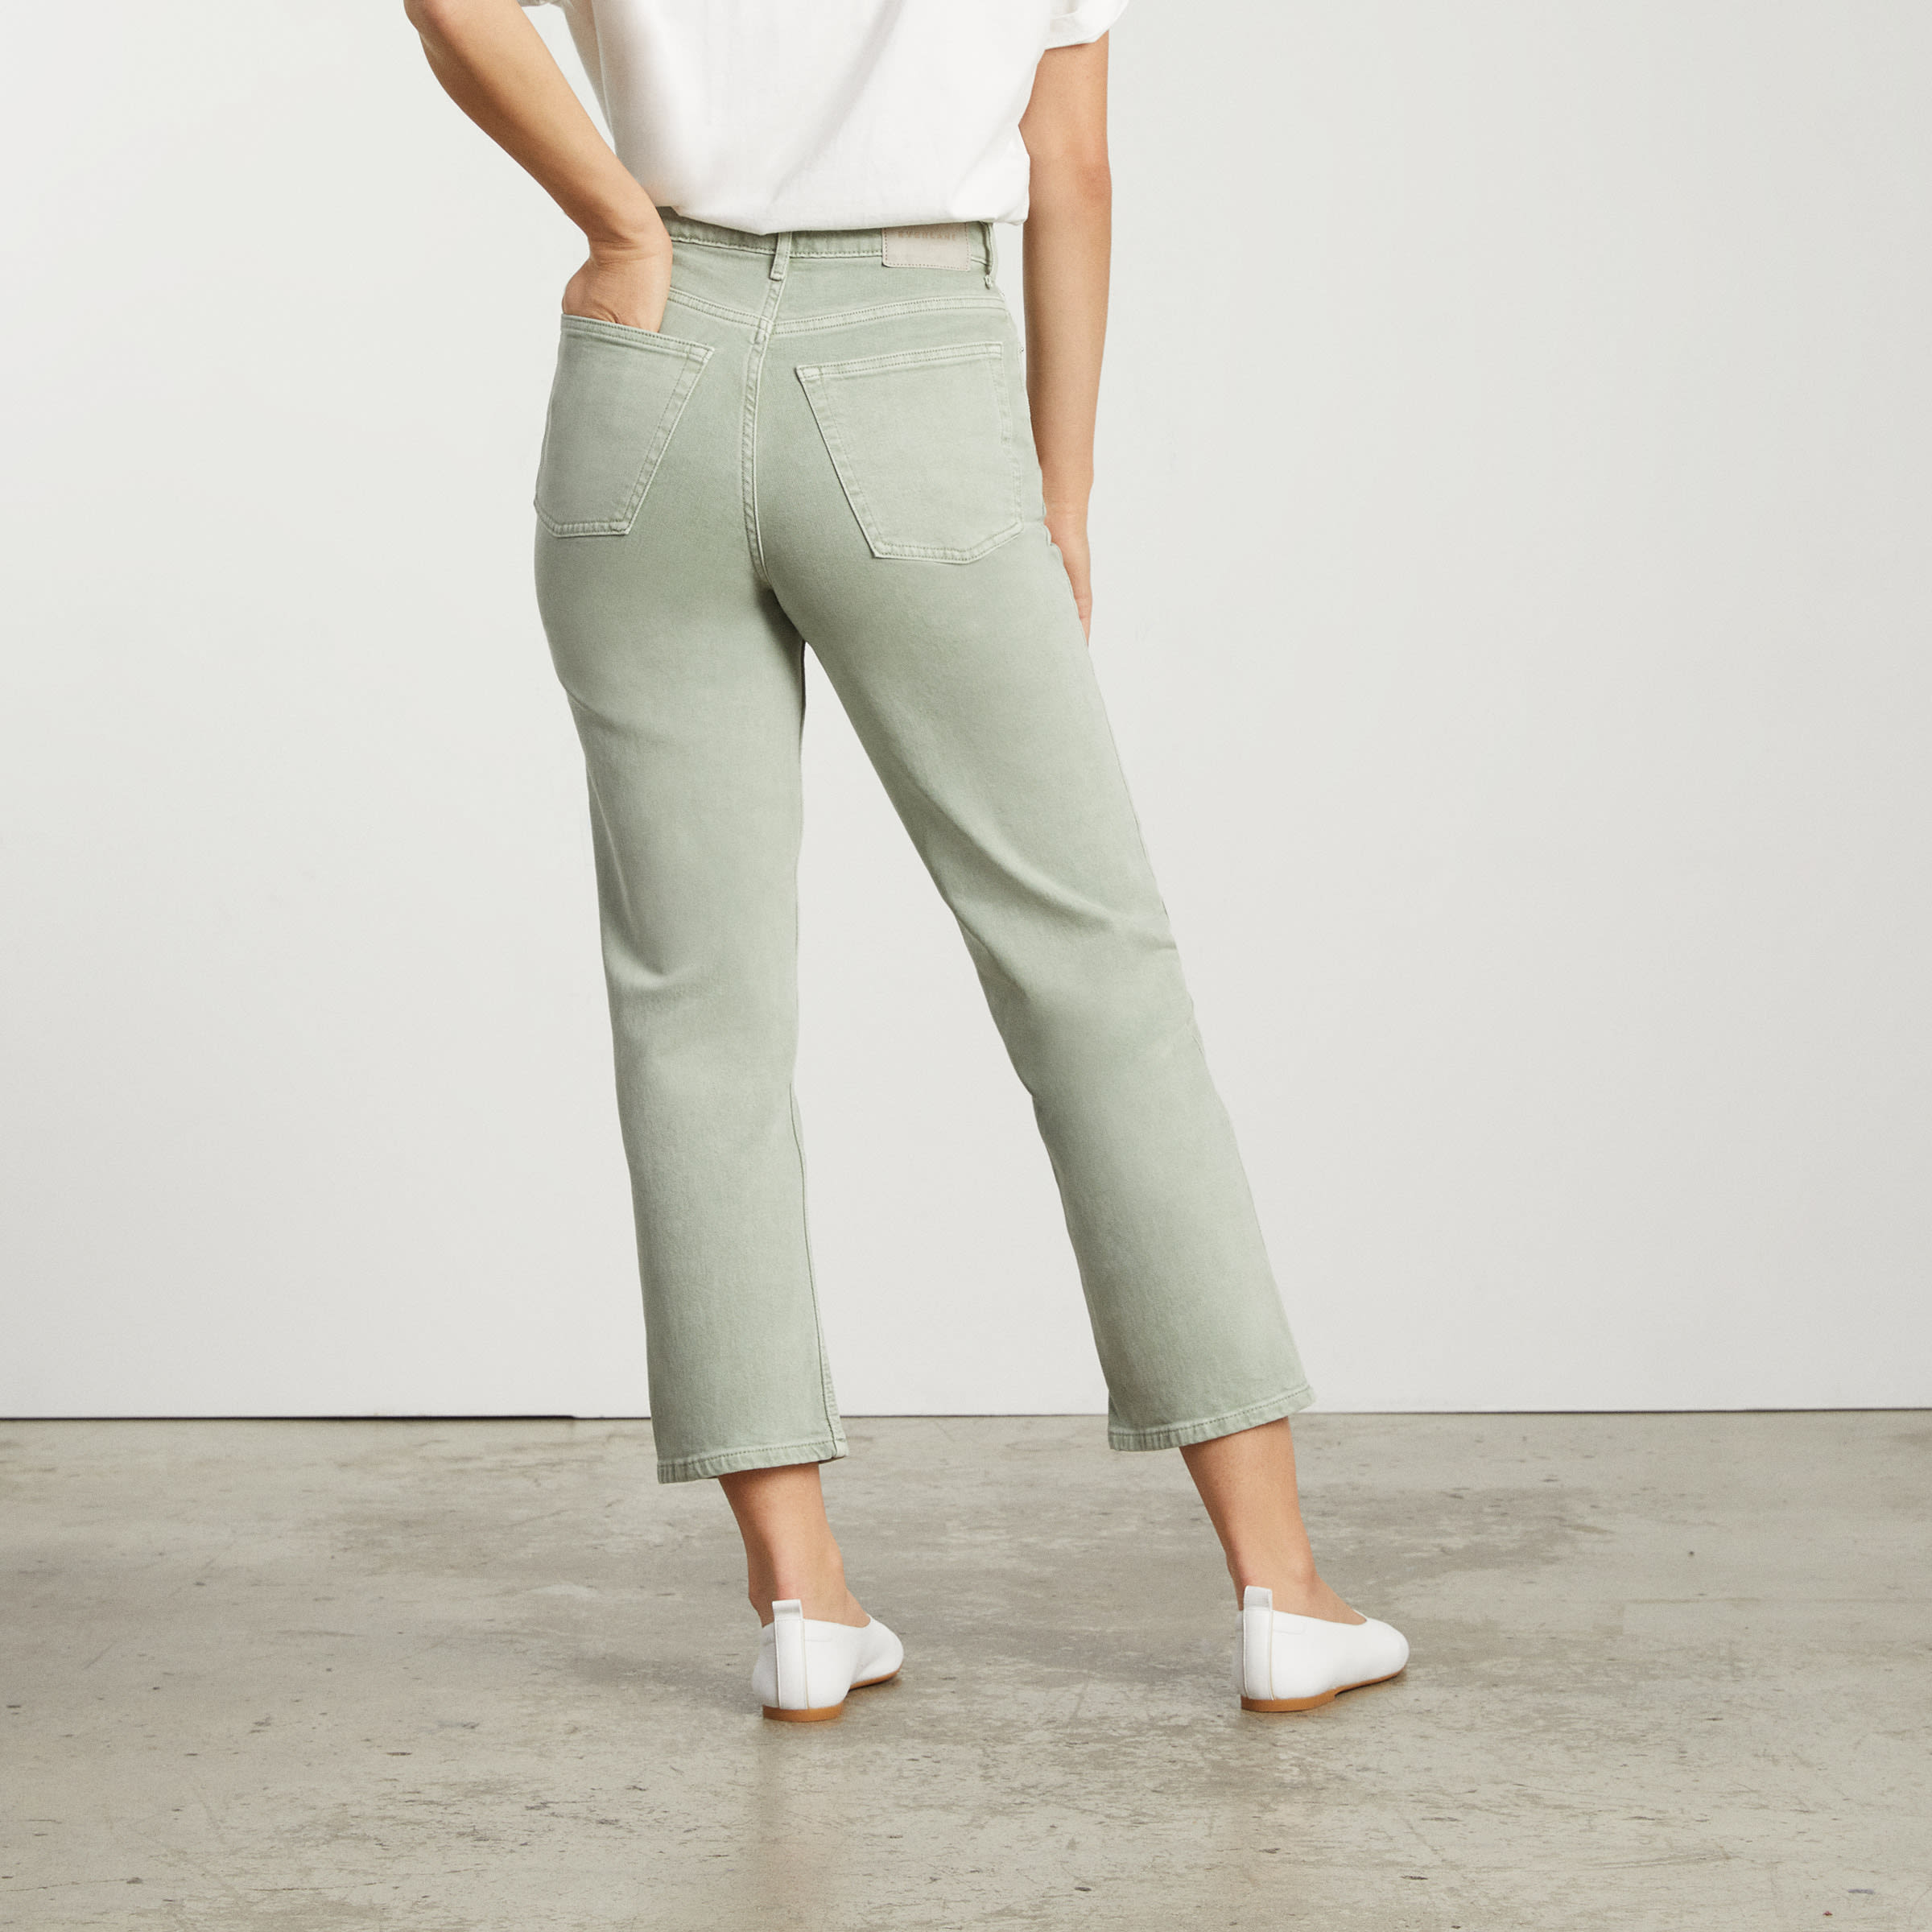 Everlane Just Launched Five New Colored Denim Styles